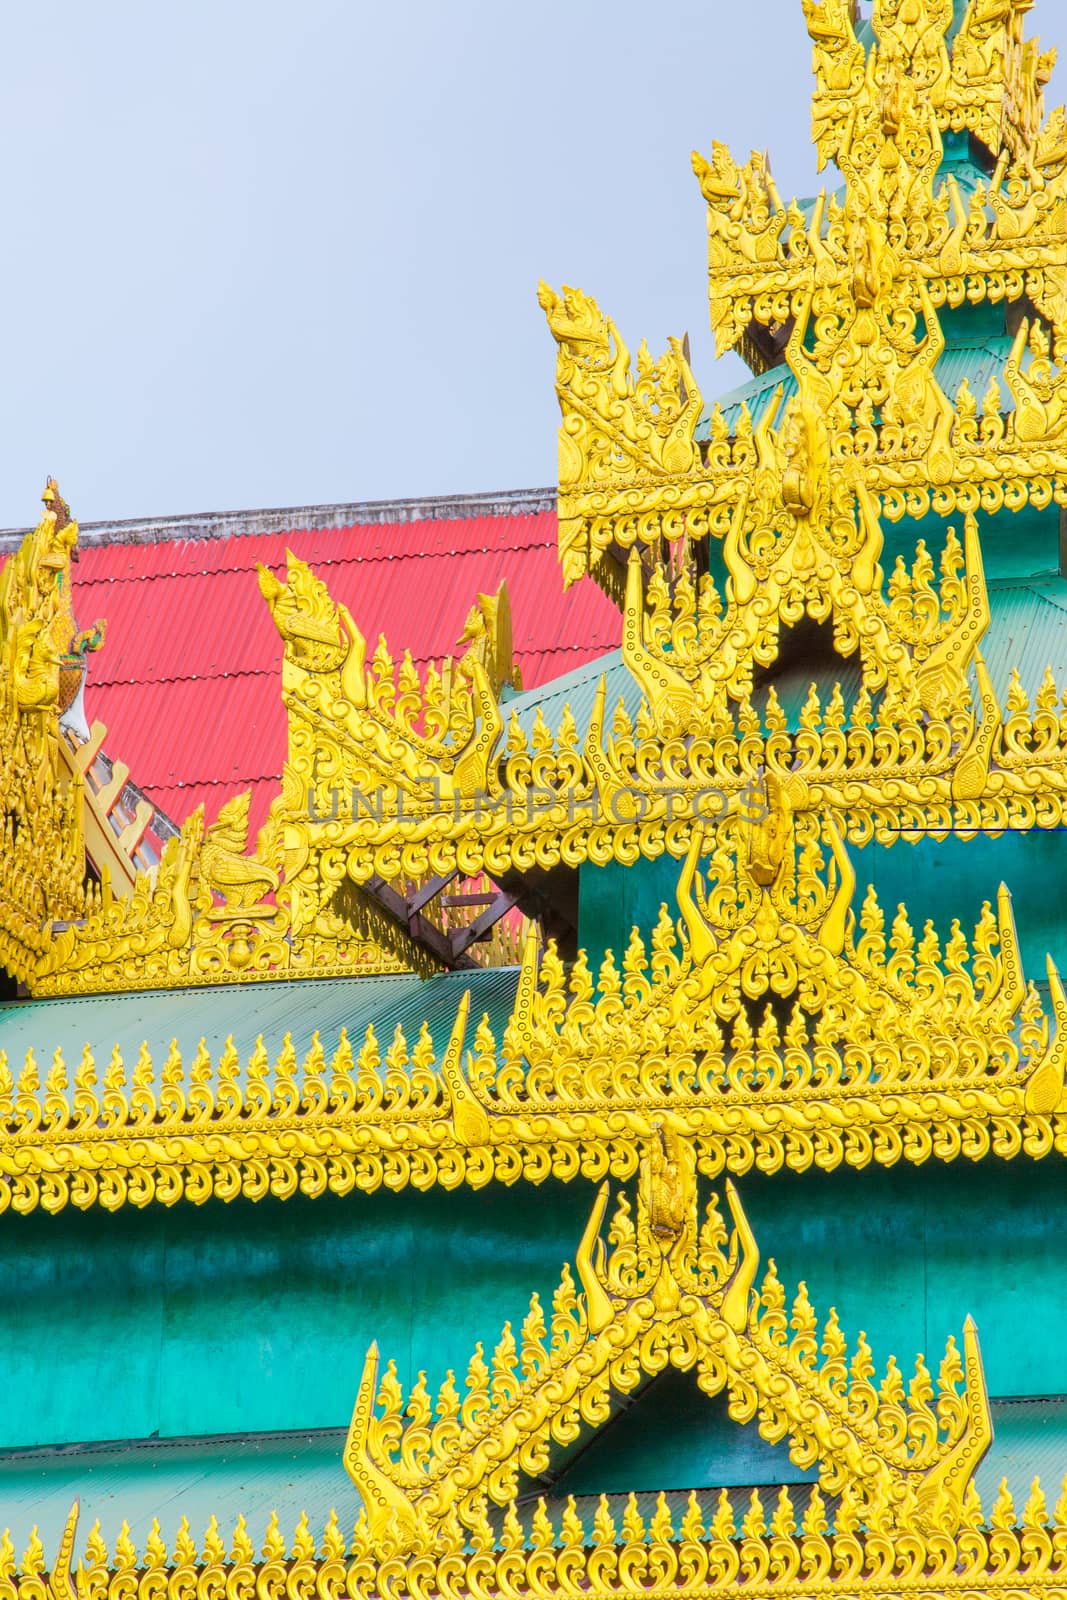 Burmese temple architecture in Thailand.